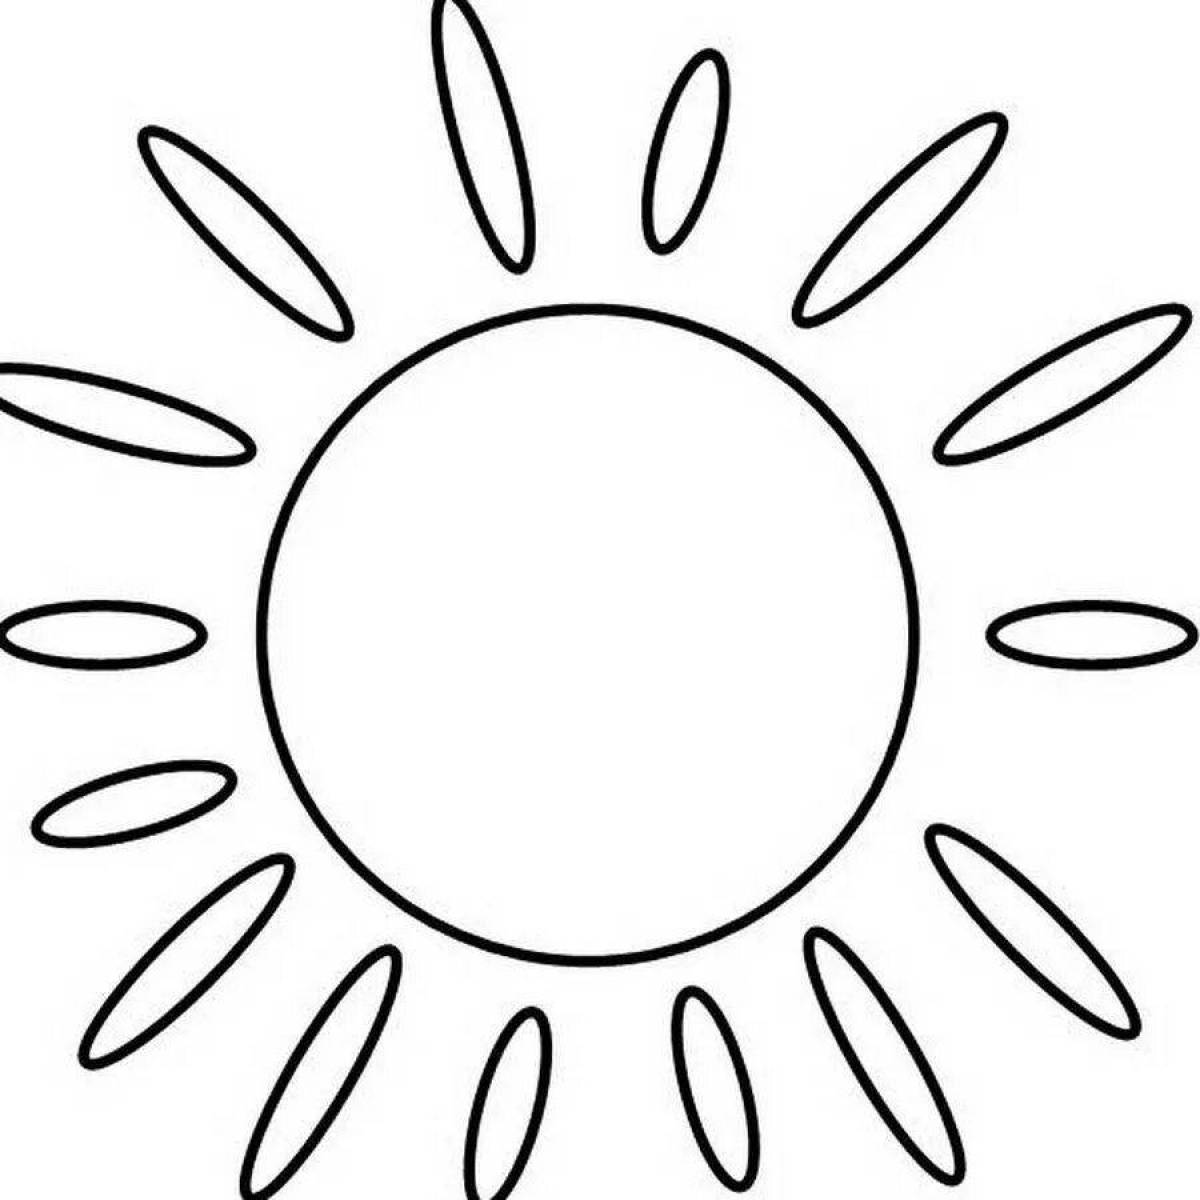 Amazing sun coloring book for 4-5 year olds